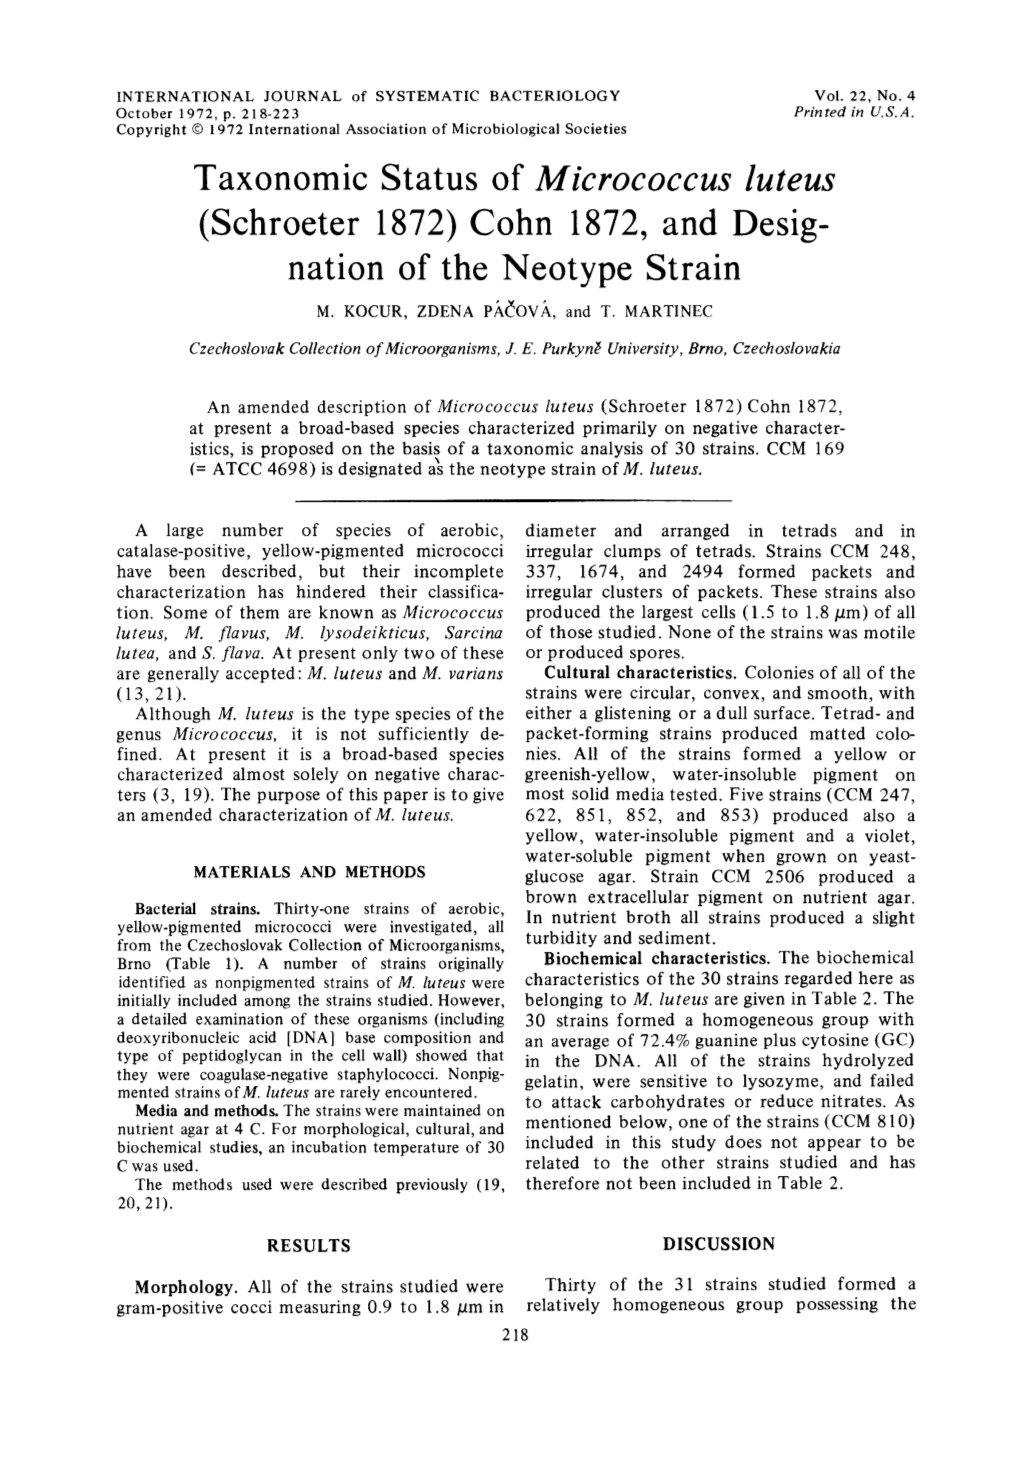 Taxonomic Status of Micrococcus Luteus (Schroeter 1872) Cohn 1872, and Desig- Nation of the Neotype Strain M